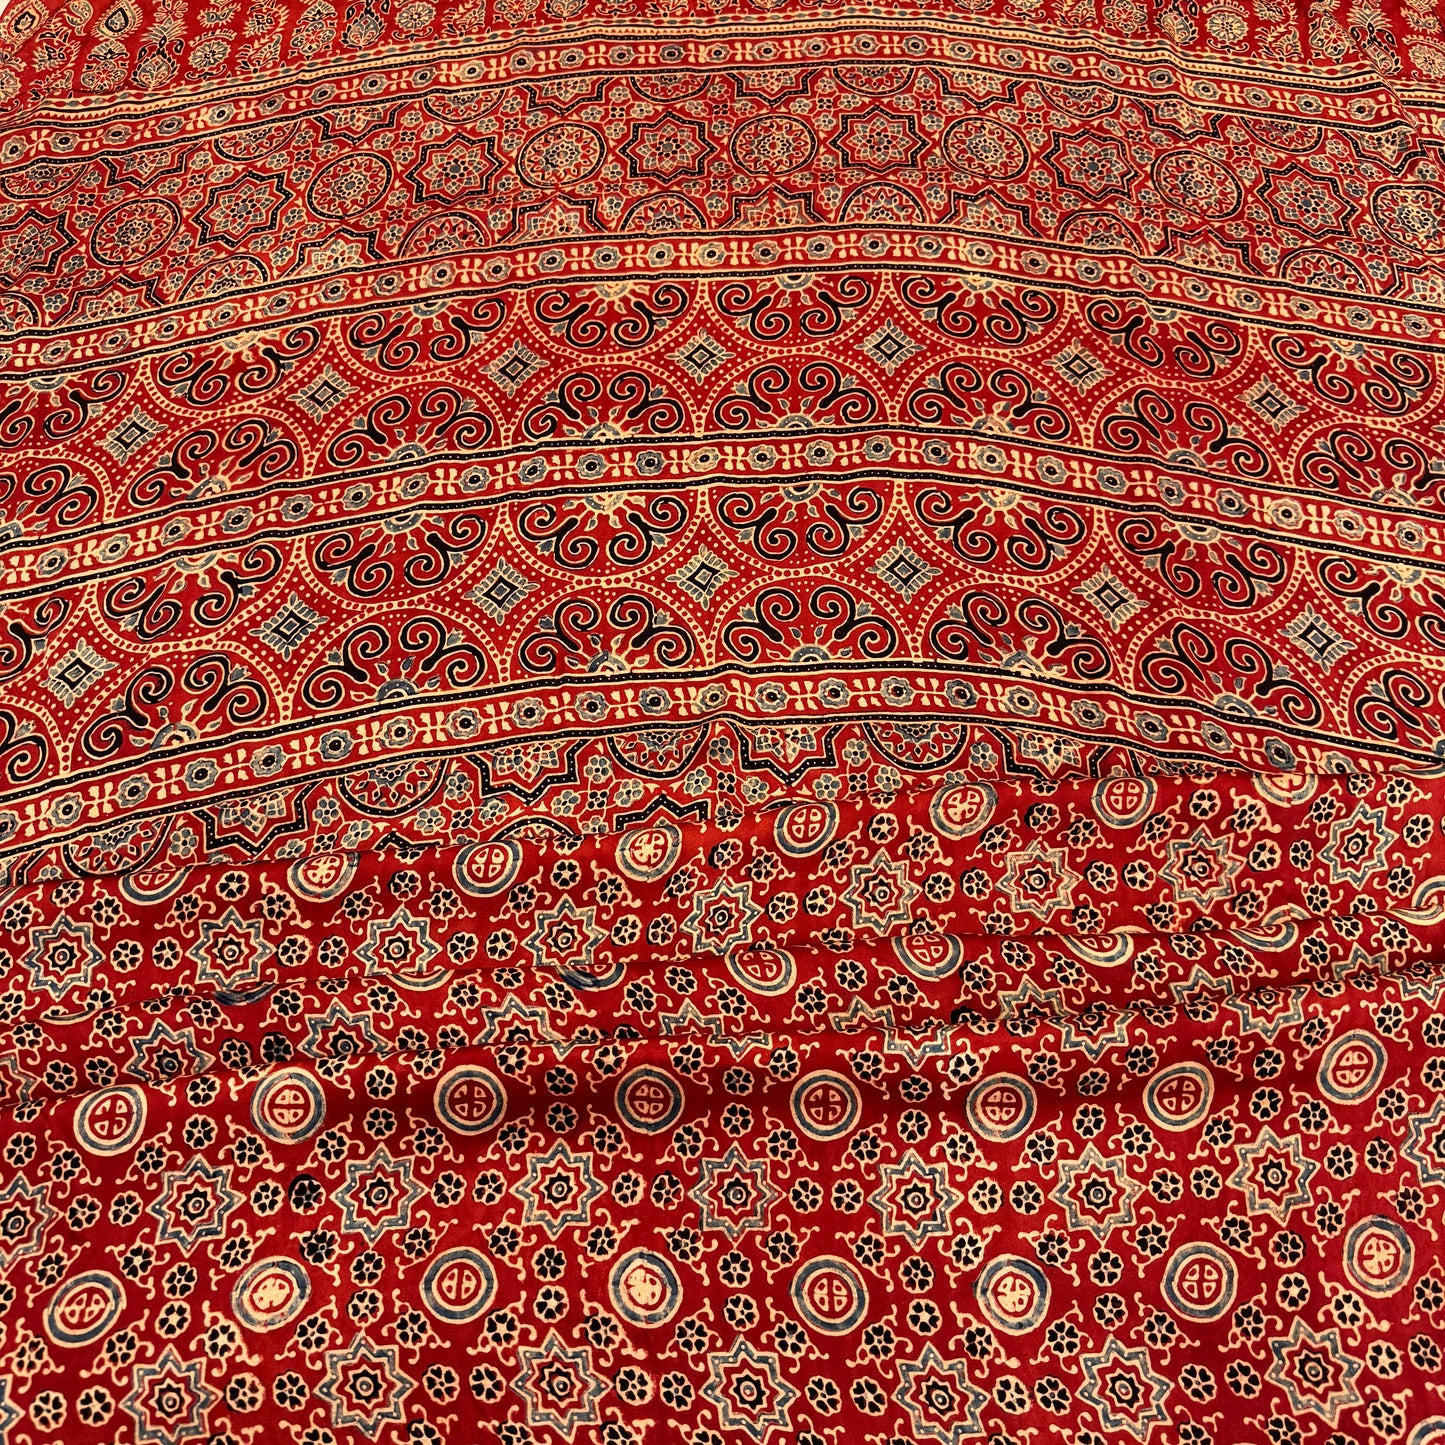 Modal Silk Ajrakh Saree With Natural Dyes - Red